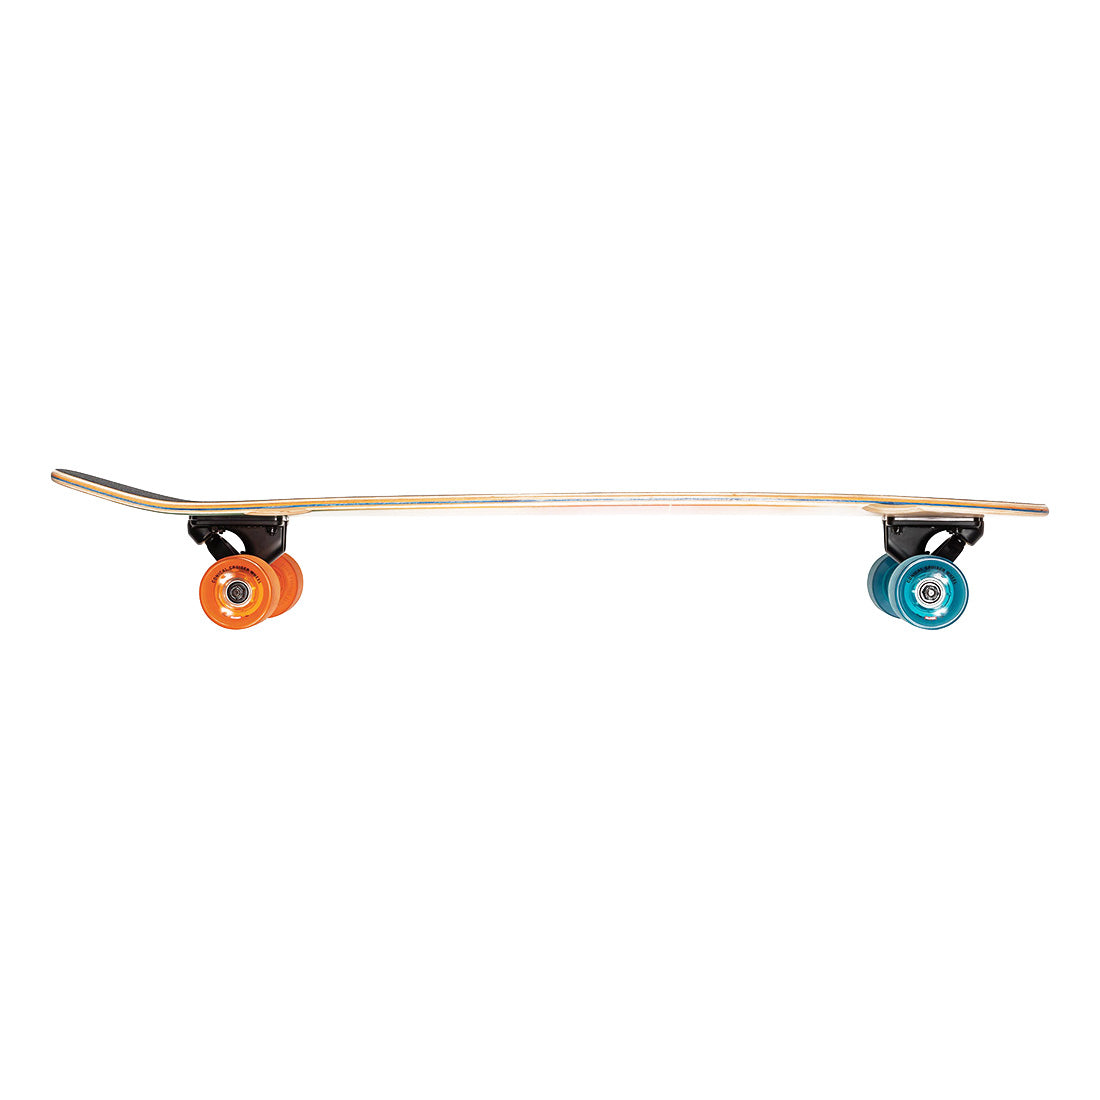 Globe The All-Time 35 Complete - Ombre Skateboard Completes Longboards